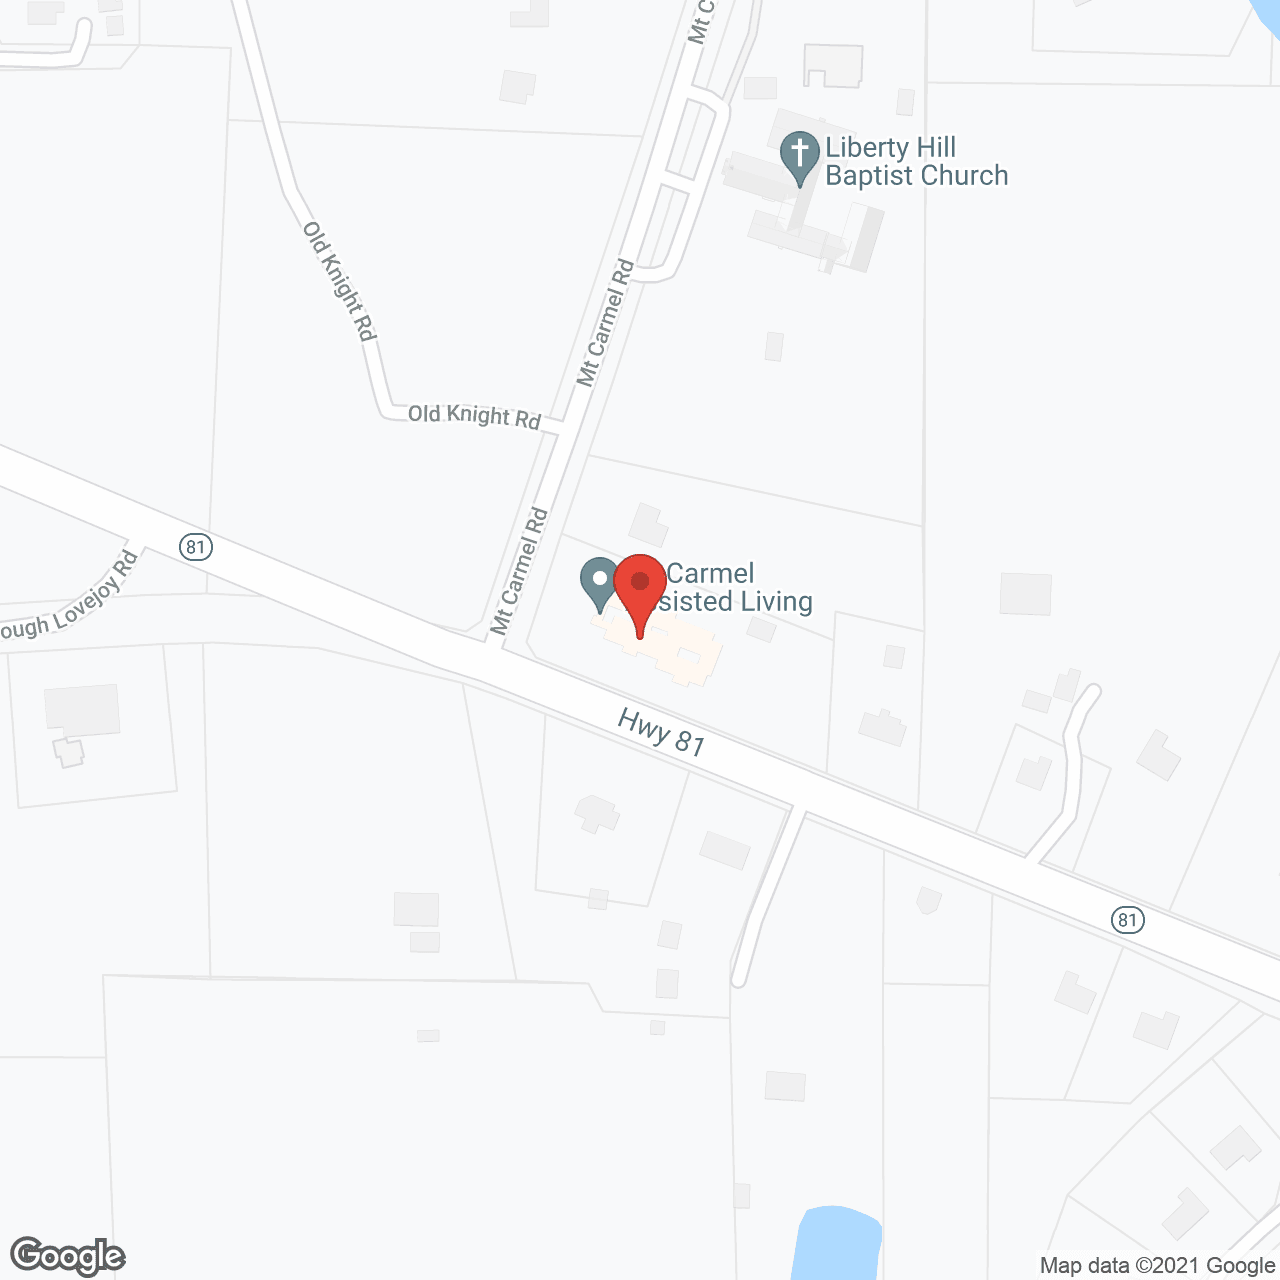 Mt Carmel Assisted Living in google map